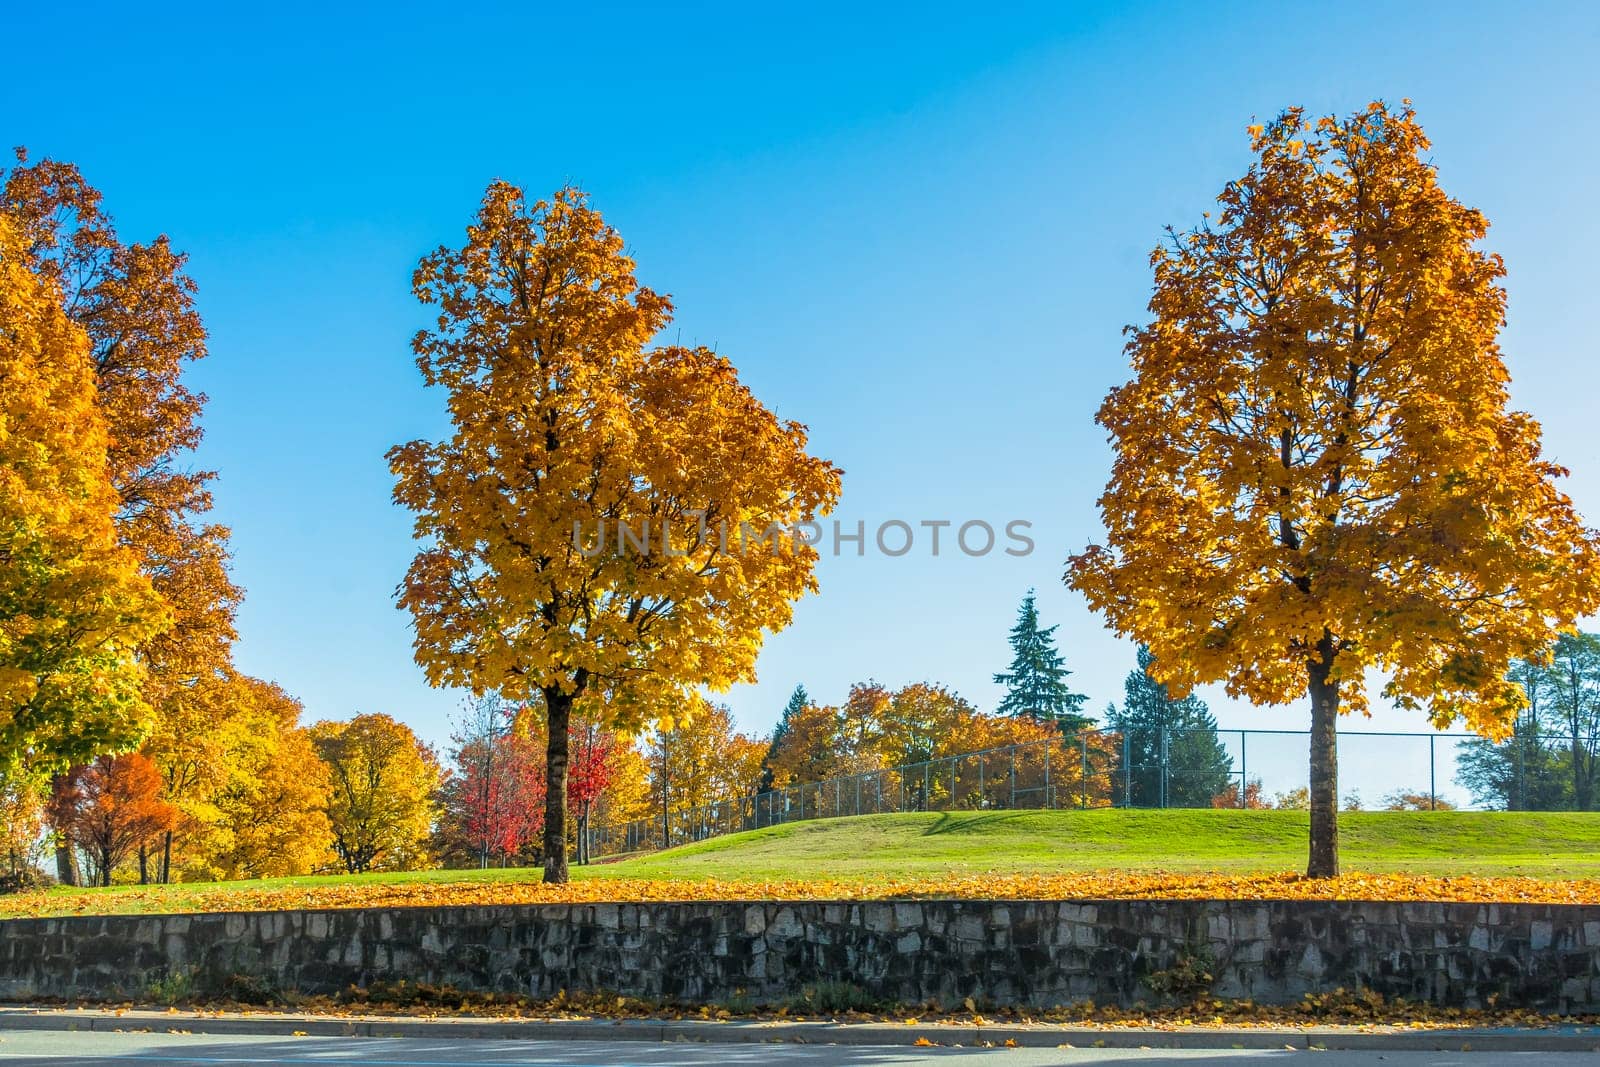 Yellow maples in the park on the land terrace. Sunny day in the park on autumn season in Cariboo Park, Burnaby, BC, Canada